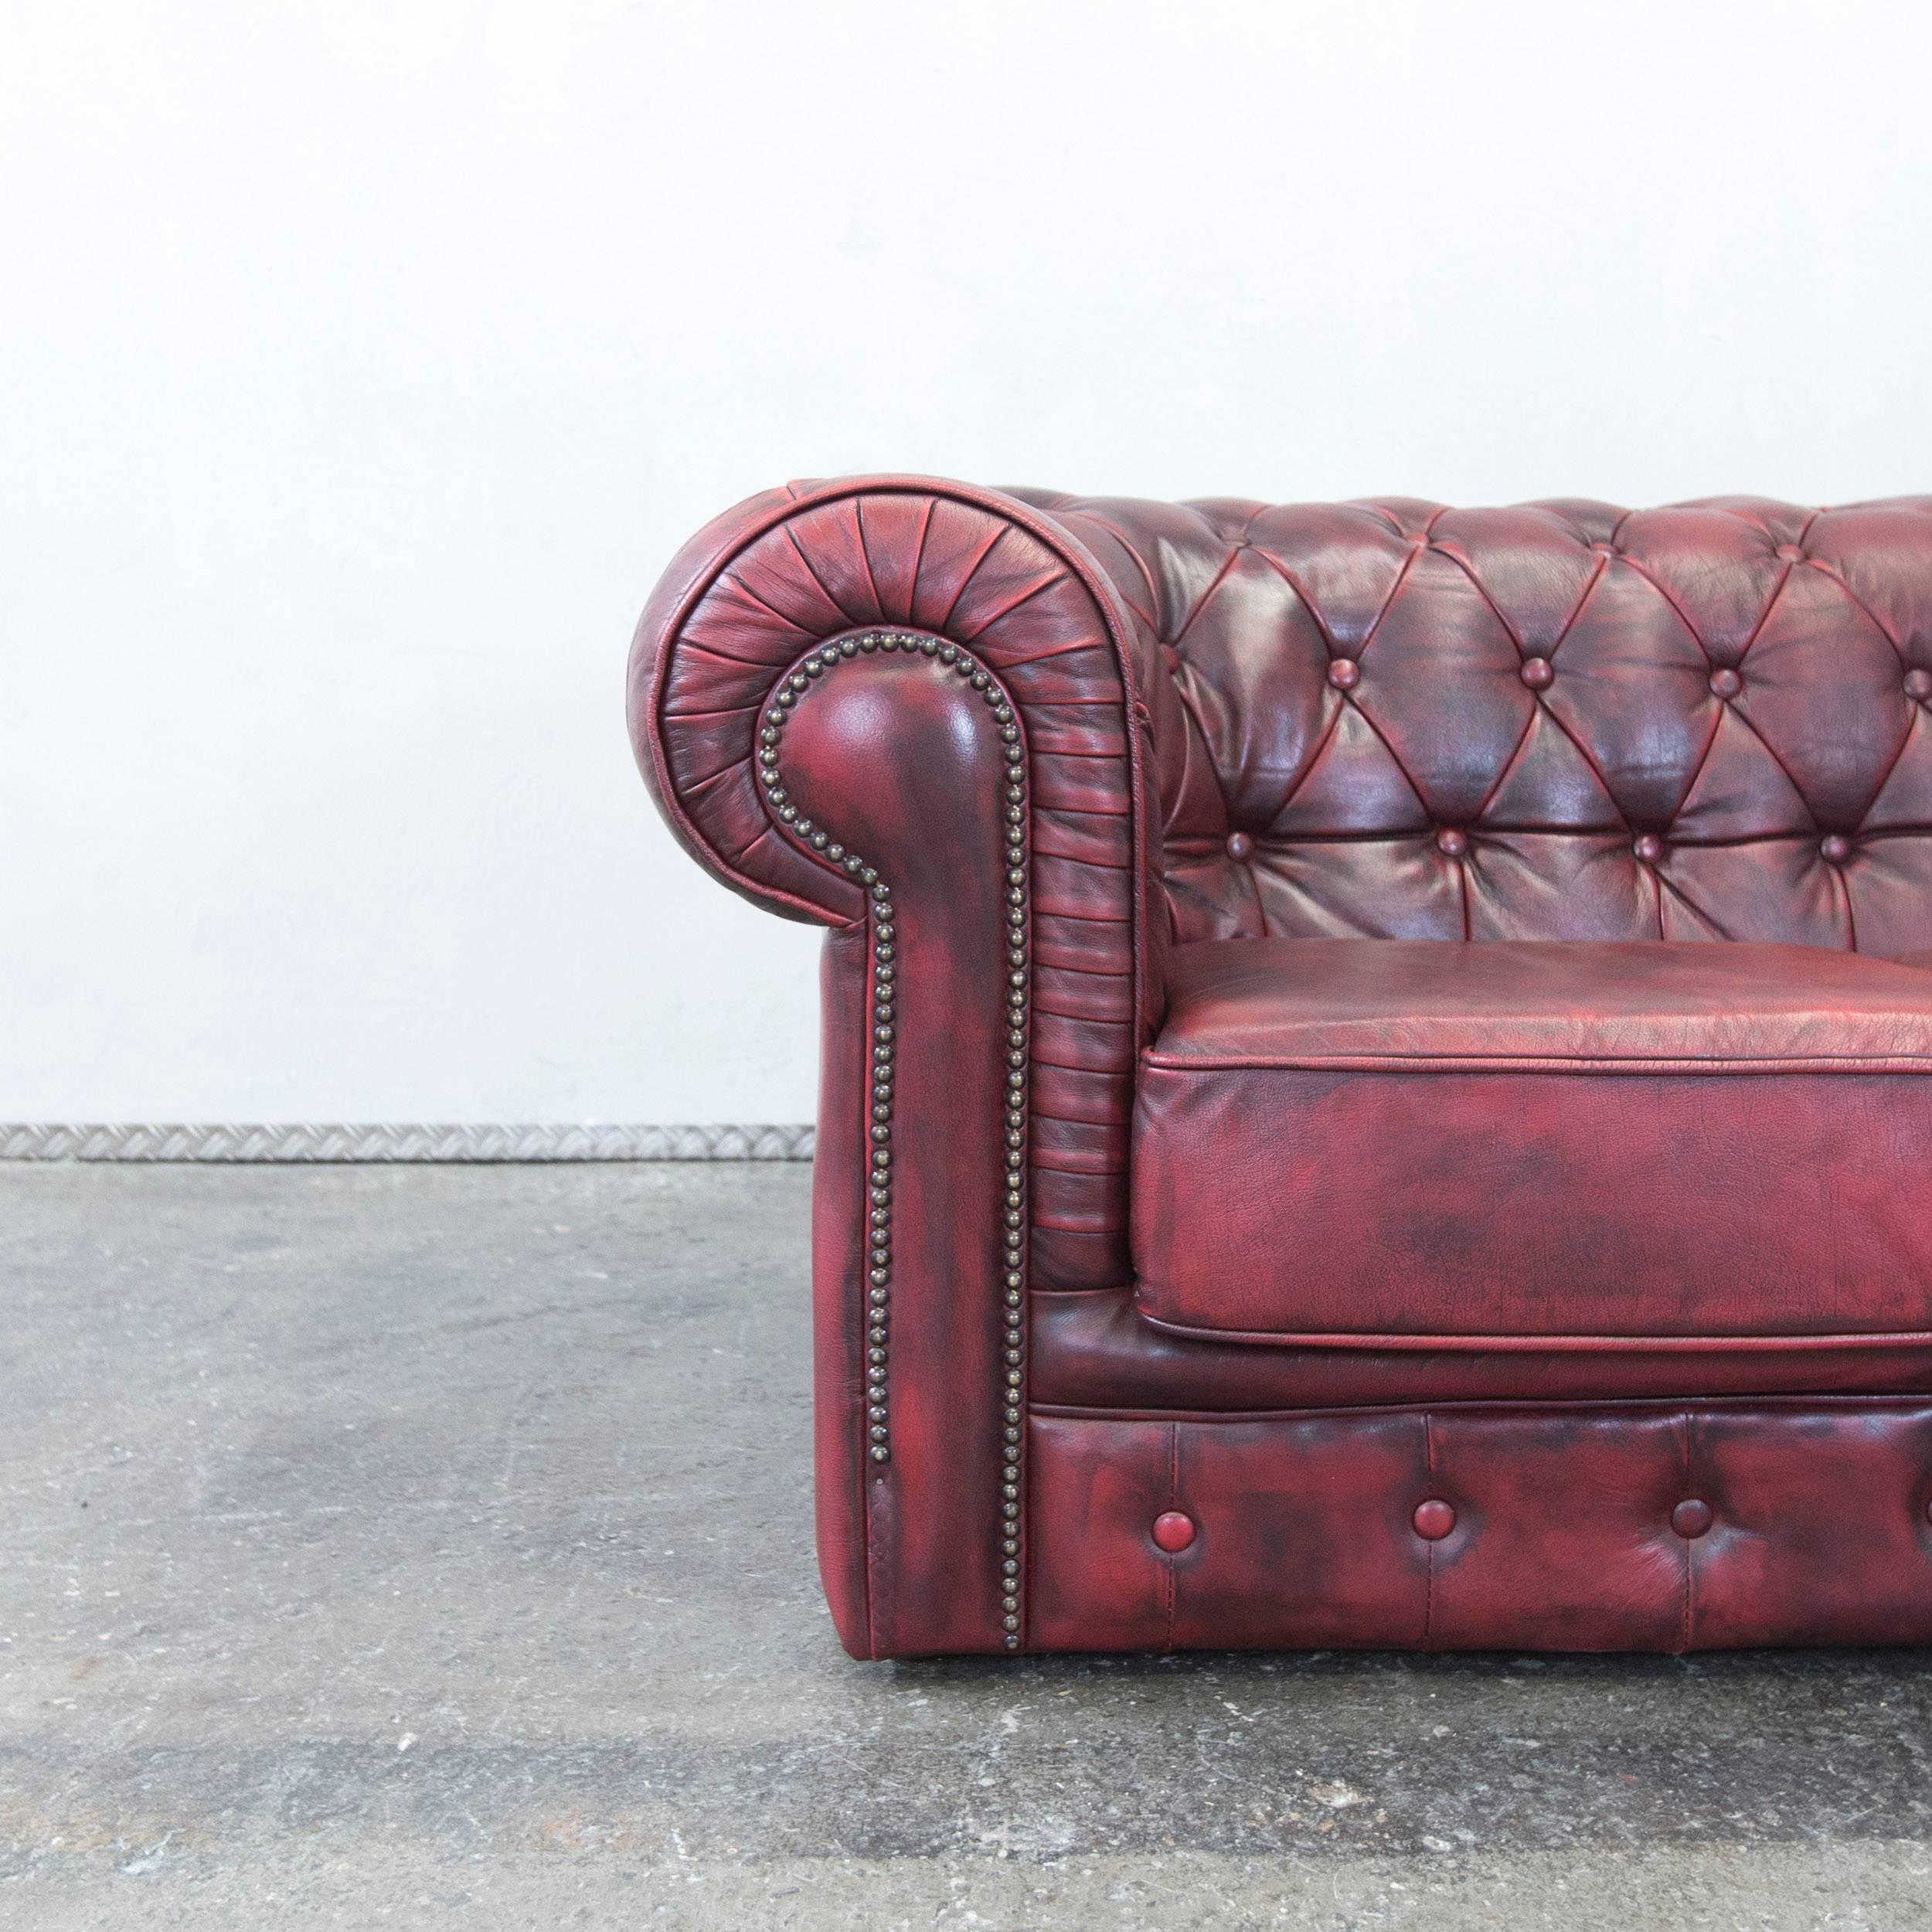 Red colored Chesterfield designer leather sofa in a vintage style, designed for pure comfort.